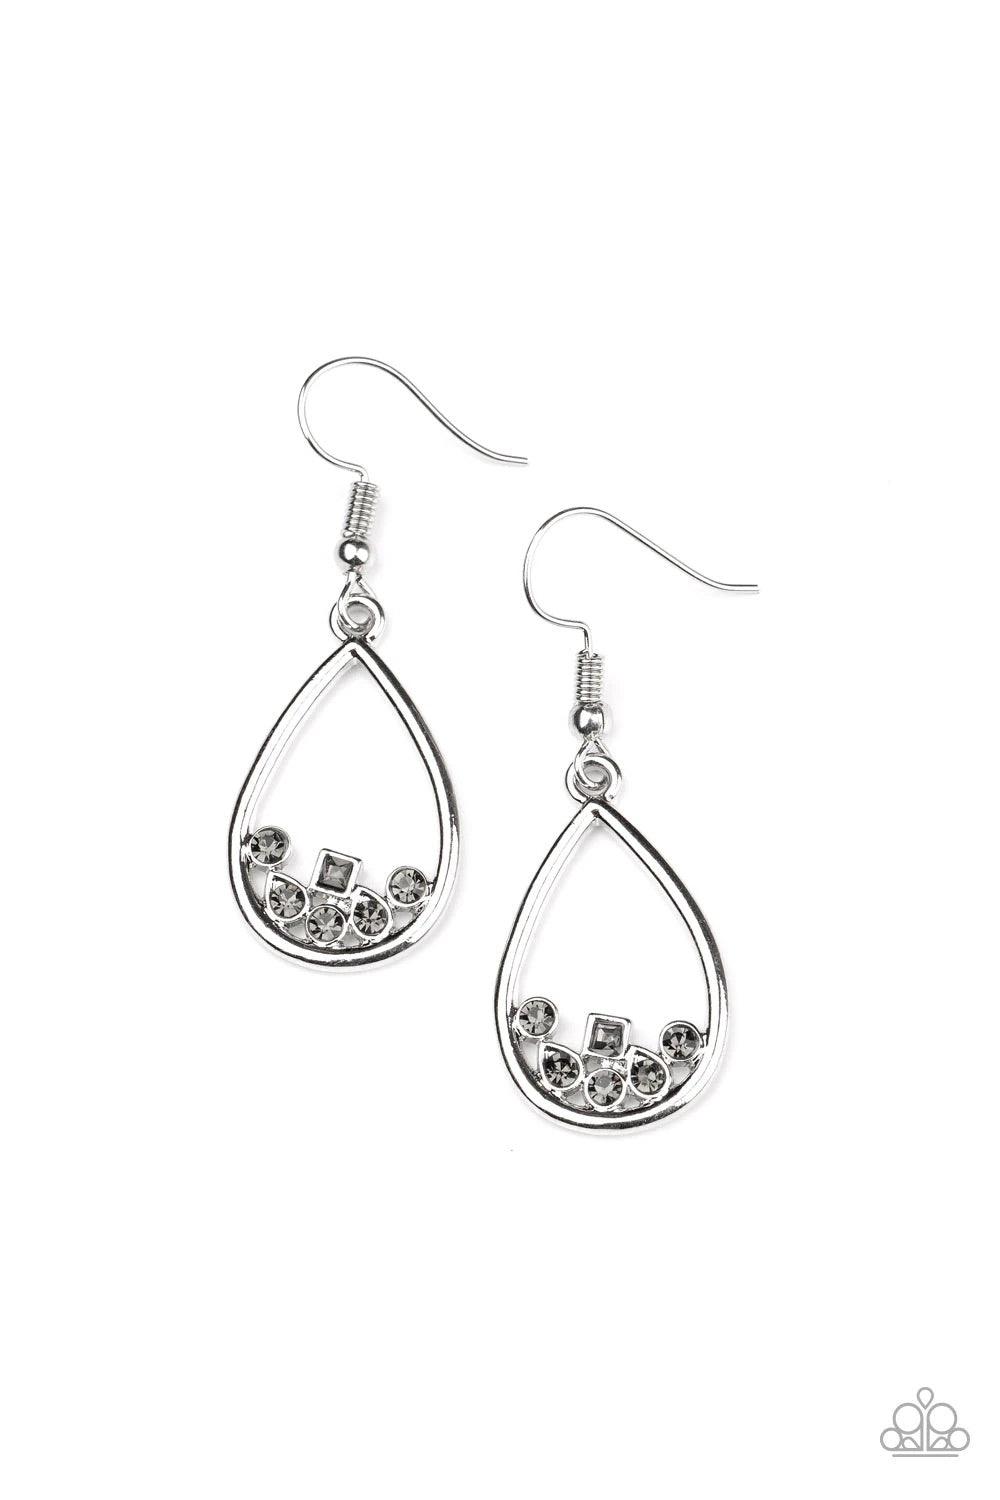 Paparazzi Accessories Raindrop Radiance - Silver Varying in shape, a collection of dainty smoky rhinestones collect at the bottom of an airy silver teardrop frame for a timeless finish. Earring attaches to a standard fishhook fitting. Sold as one pair of